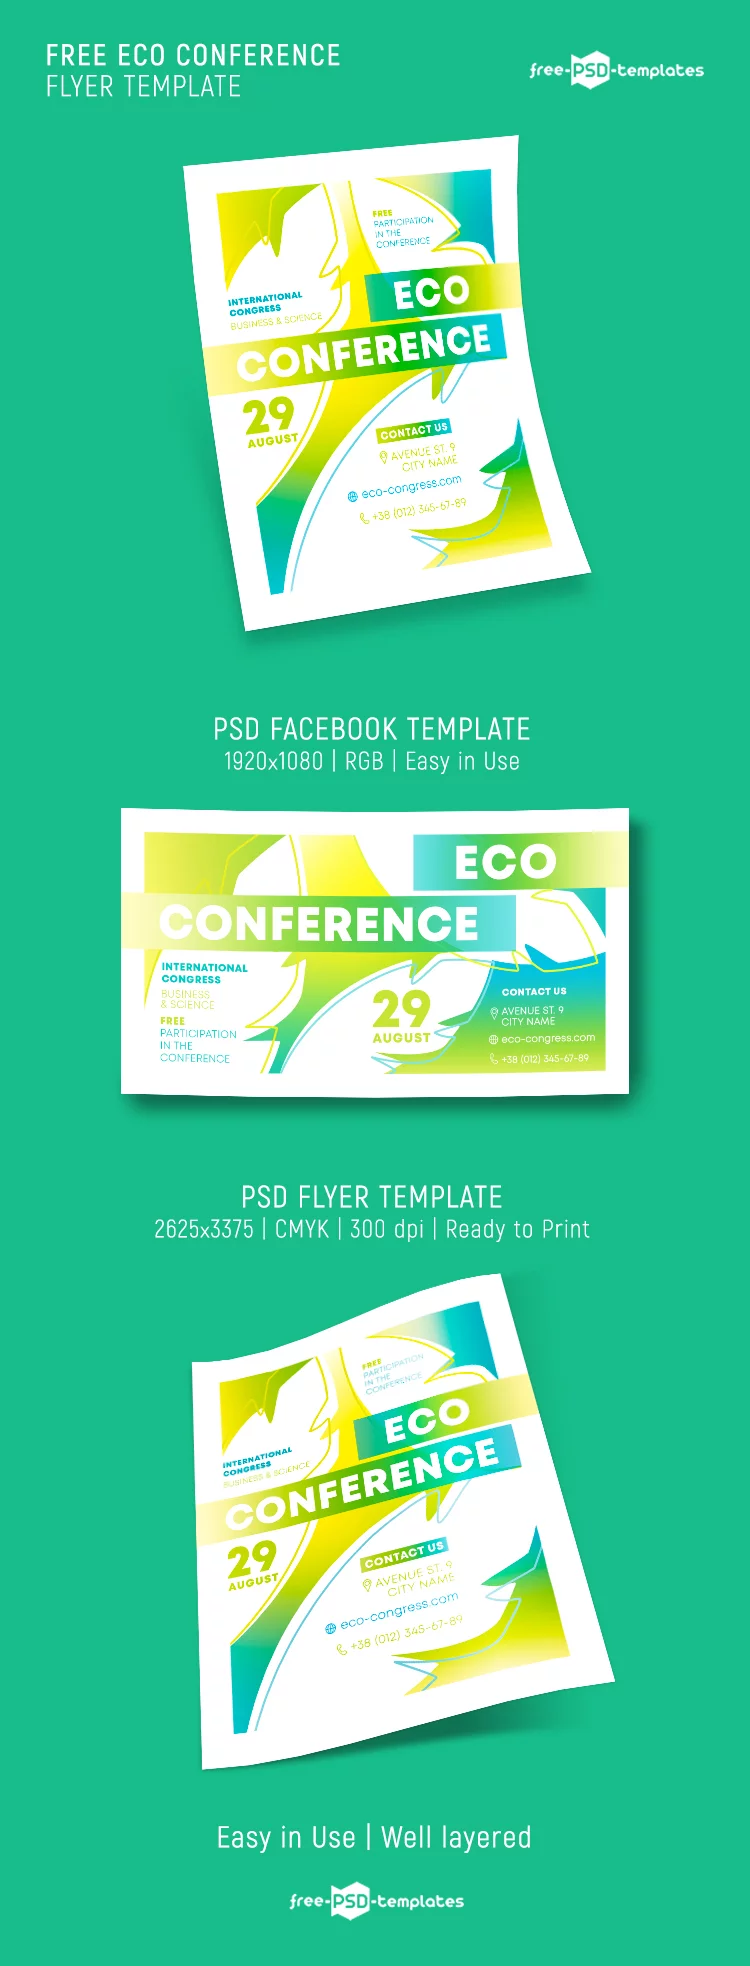 Free Eco Conference Flyer Template